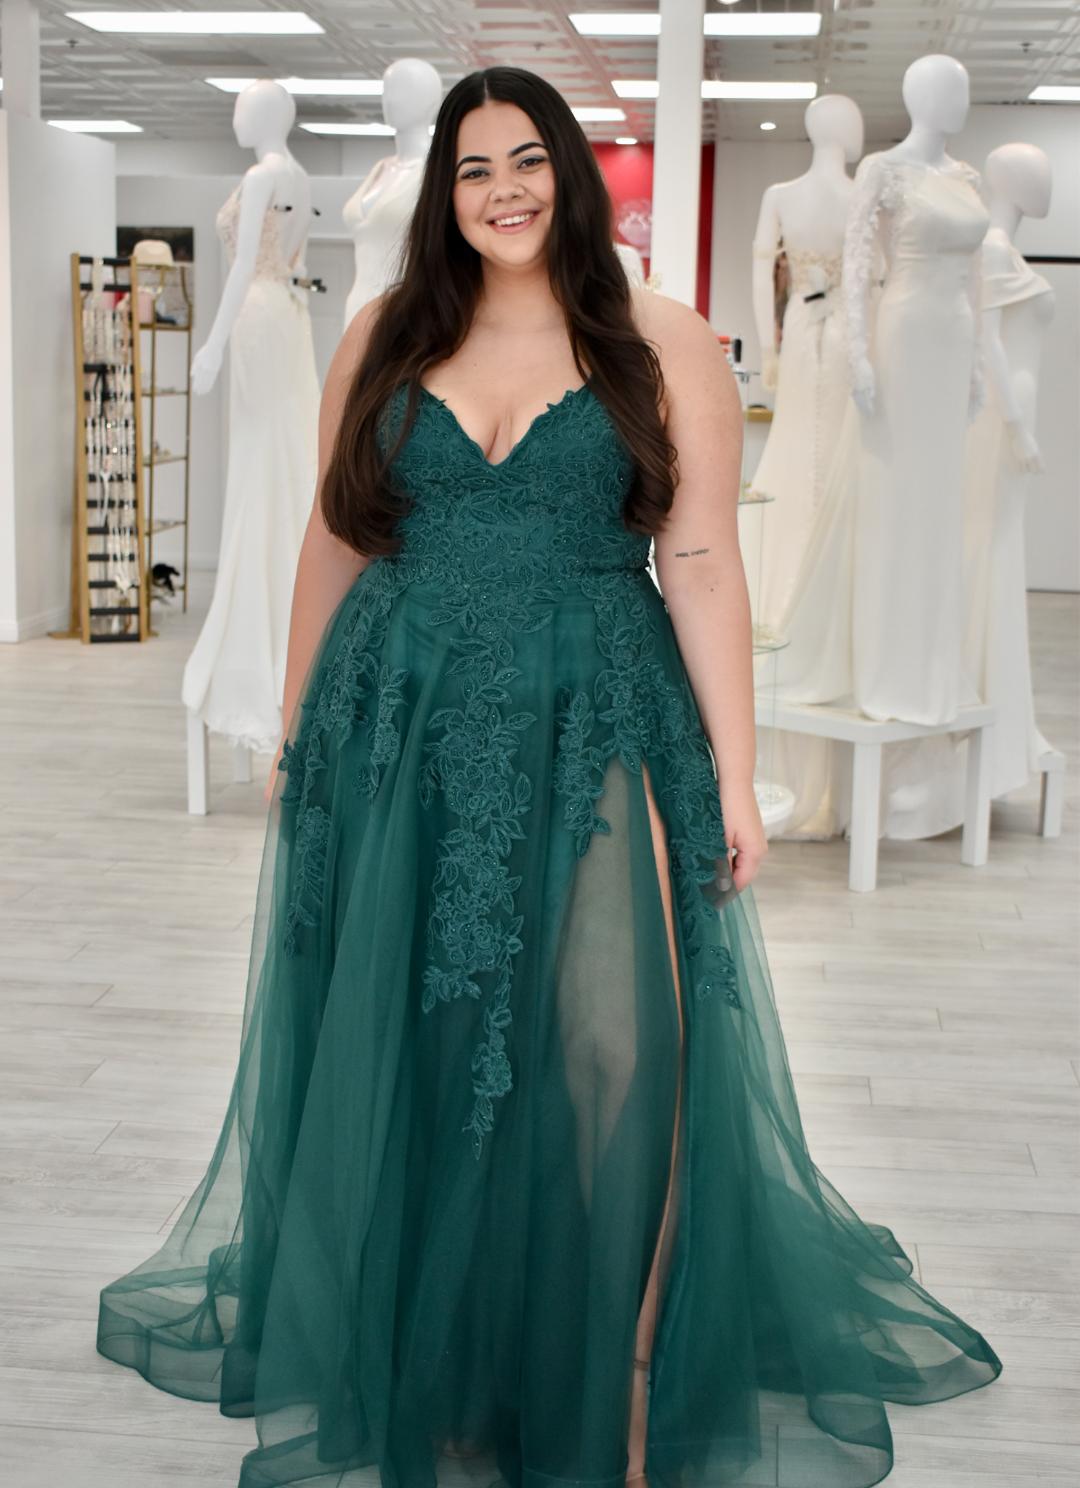 The 12 Best Plus-Size Wedding Dresses For Any & Every Wedding  Plus size  formal dresses, Plus size prom dresses, Prom dresses